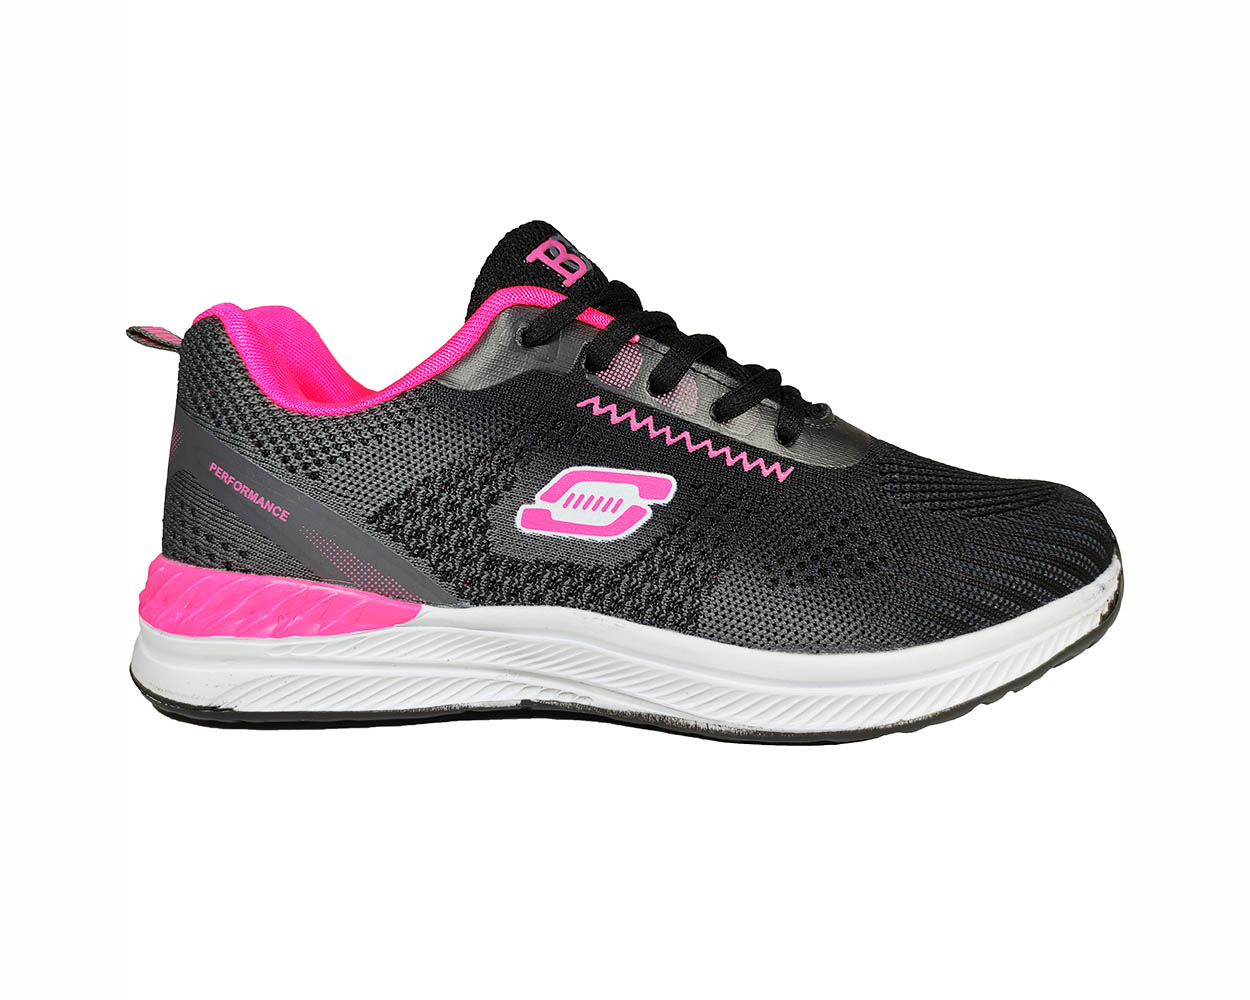 Womens Sports Shoes BC SD14046 Black/Pink